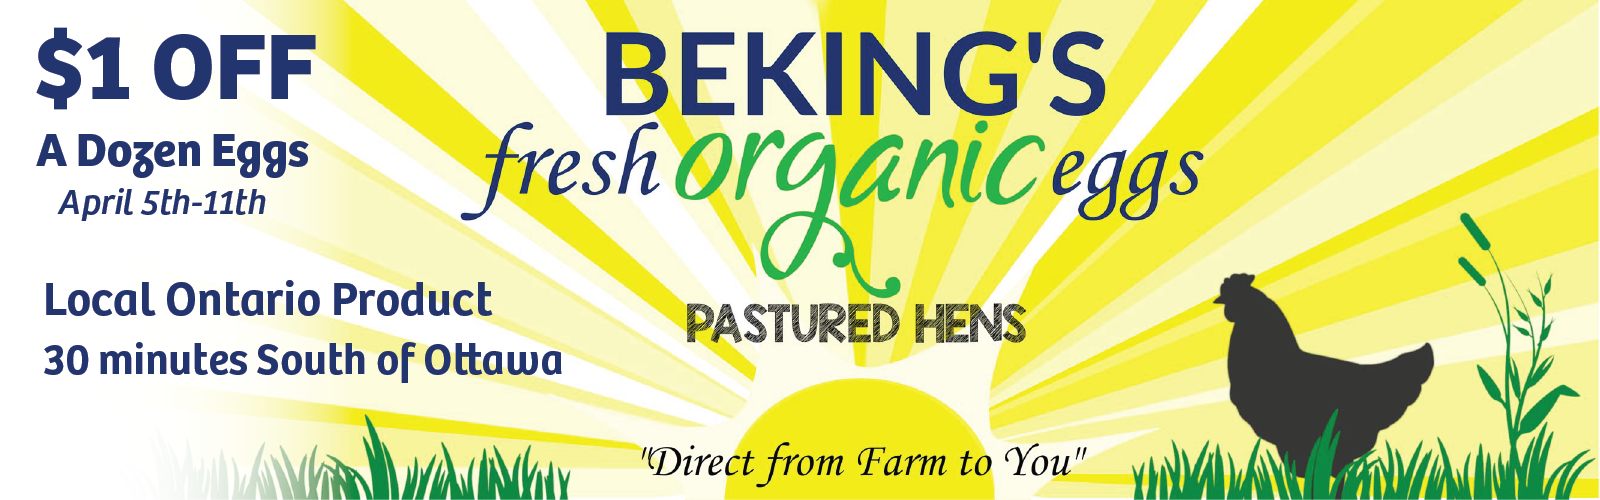 Discover the Beking's Poultry Farm Difference: Why Kardish Exclusively Offers Their Eggs — Now $1 Off!